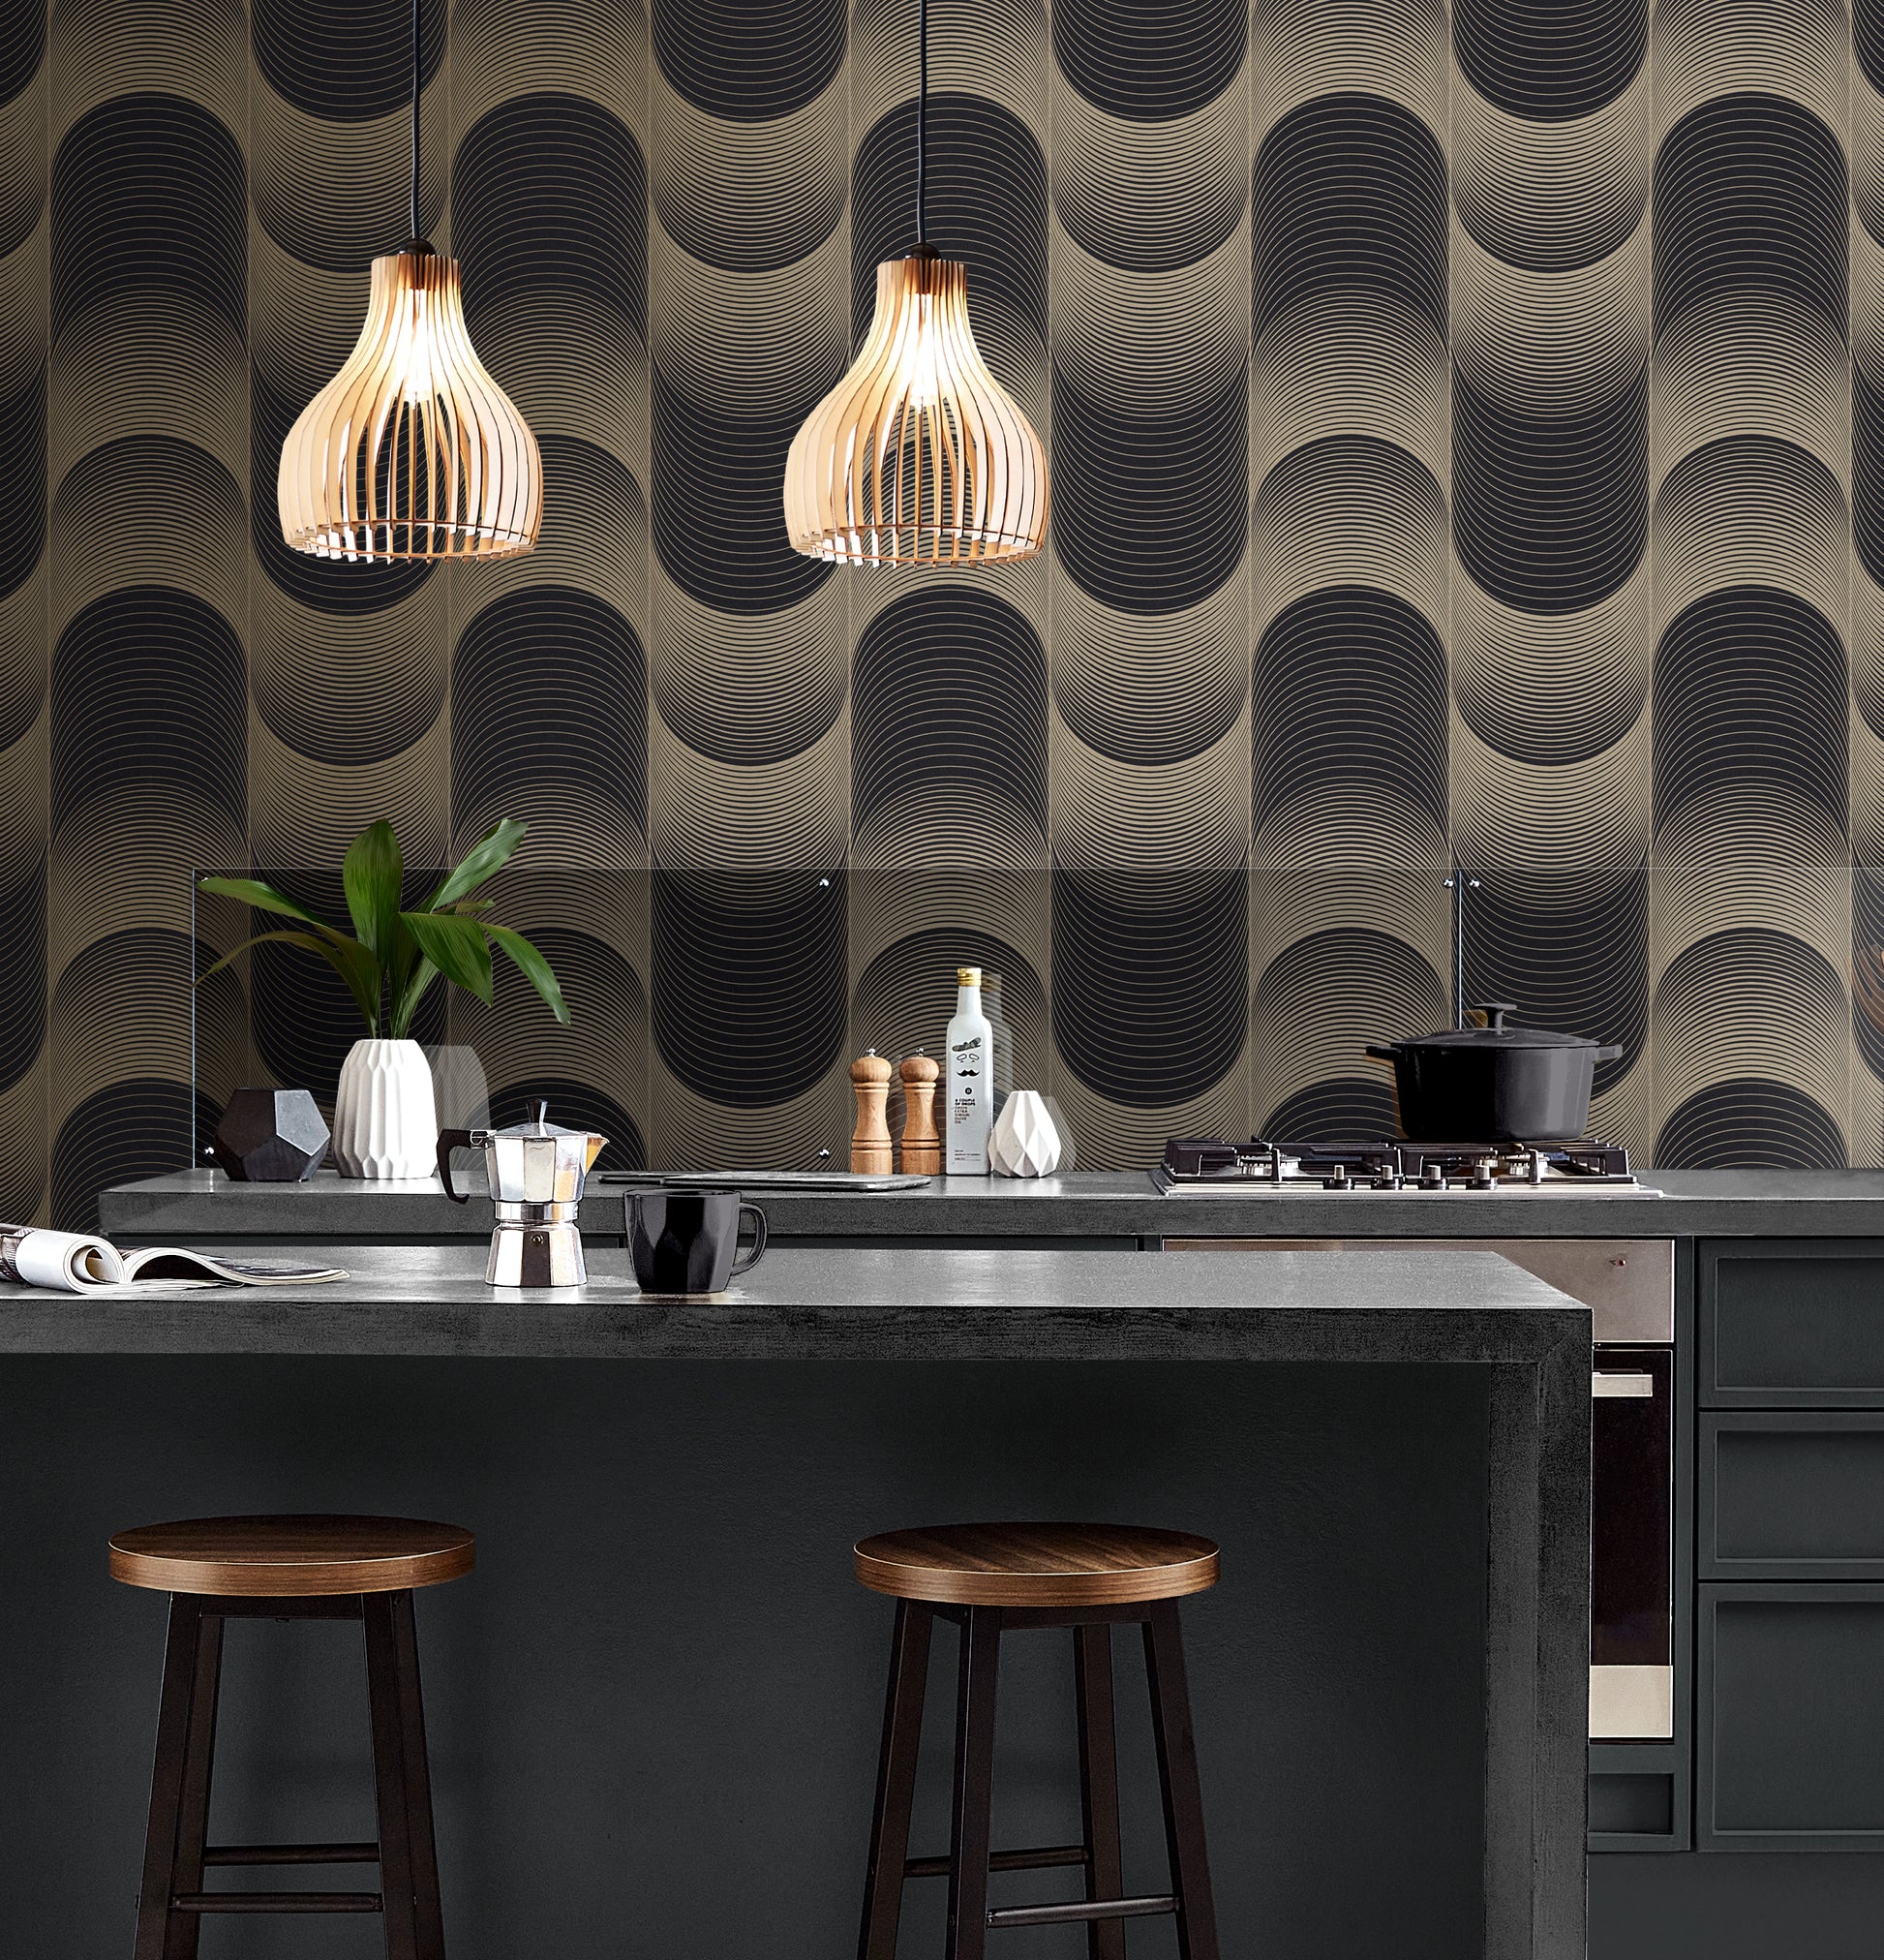 Select Graham & Brown Wallpaper Eclipse Black and Gold Removable Wallpaper_2